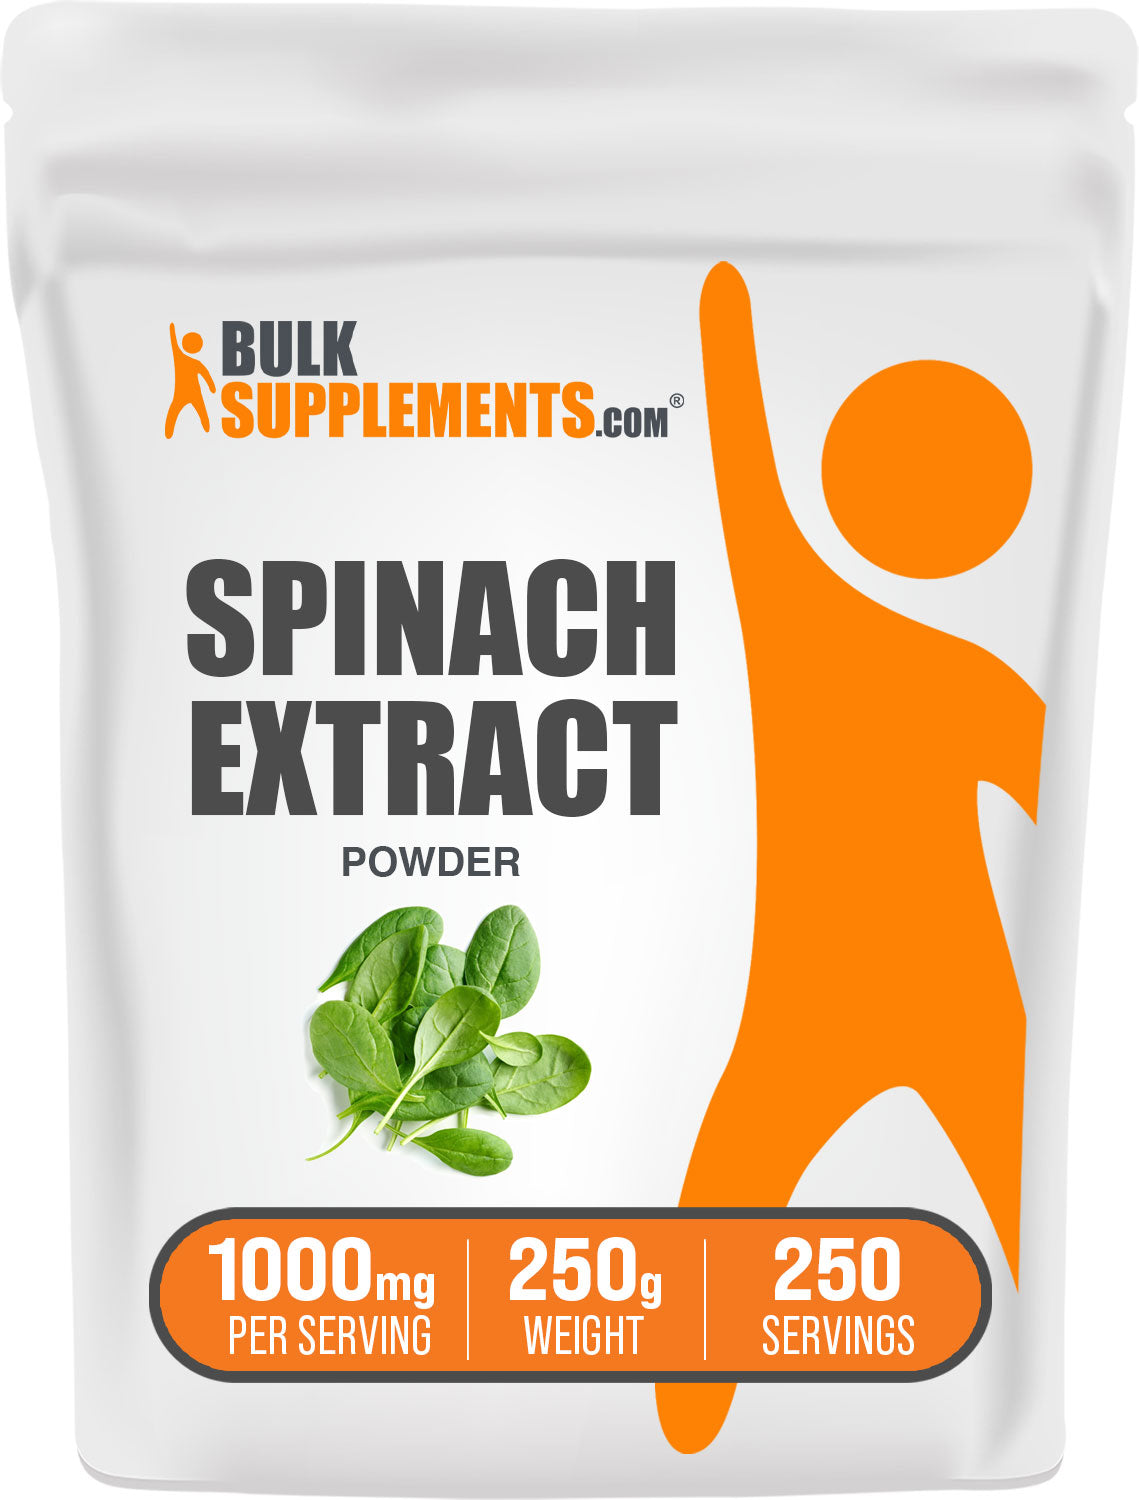 BulkSupplements Spinach Extract Powder 250g bag